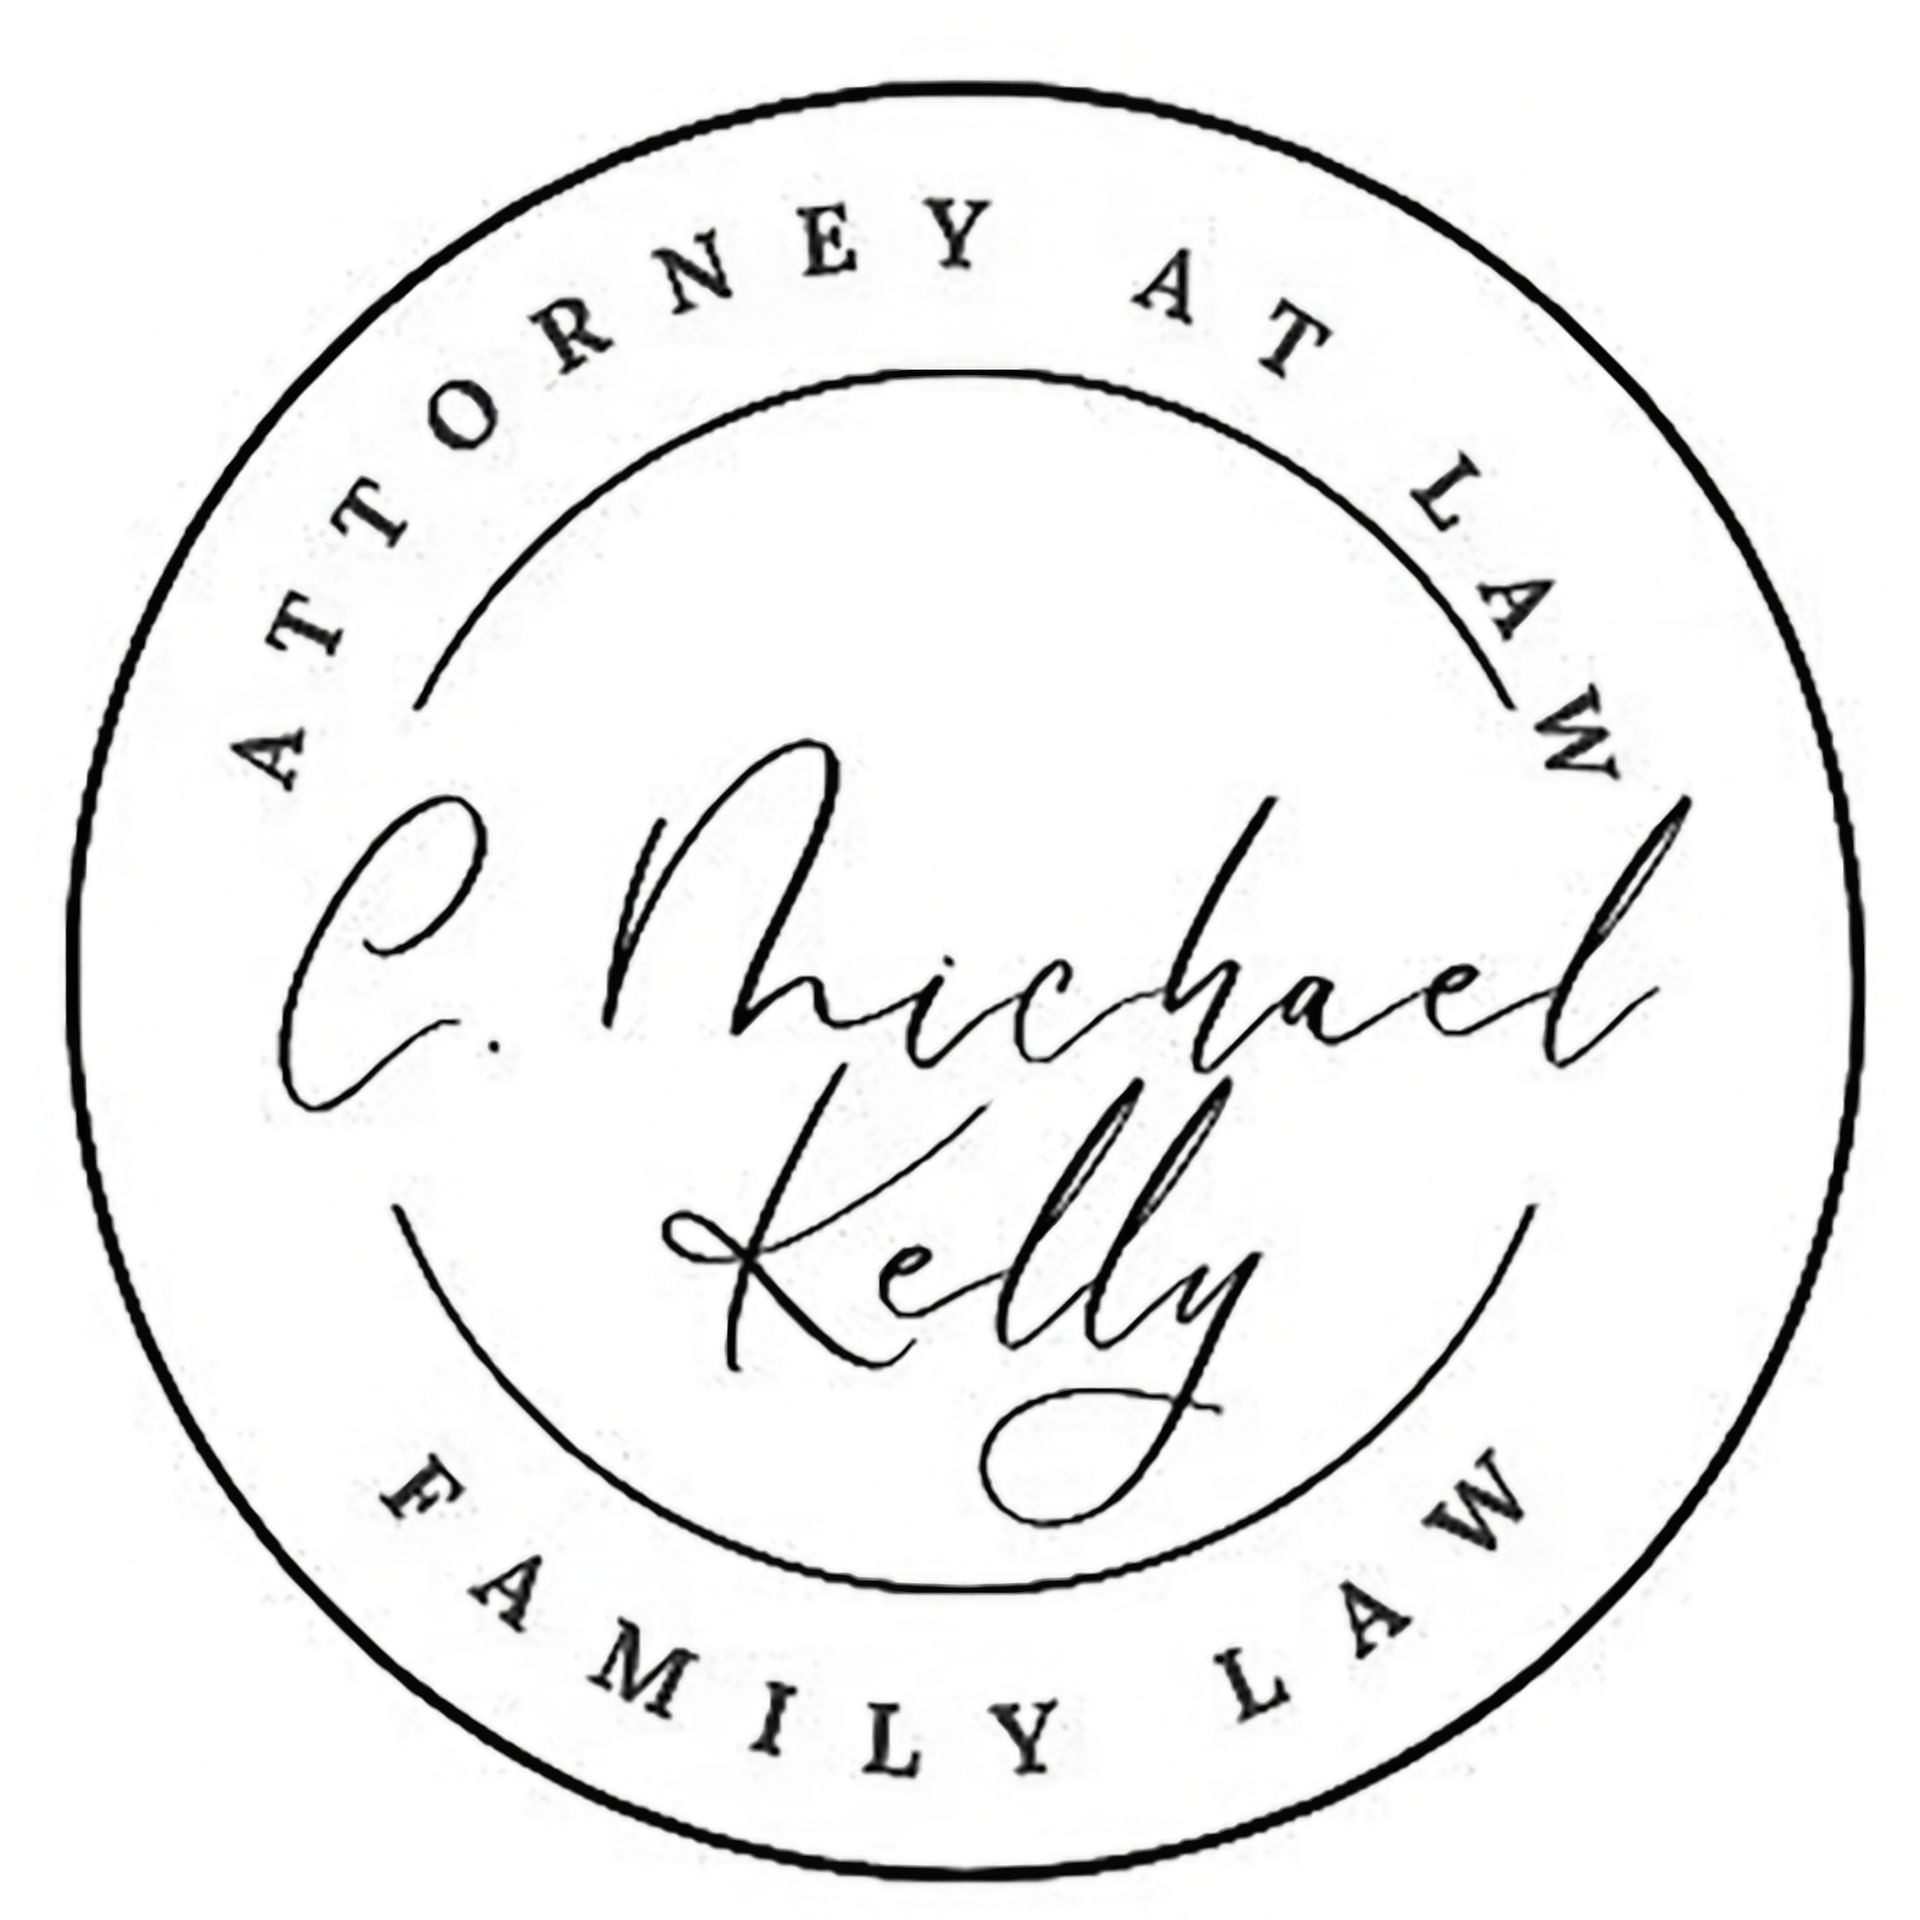 A logo for attorney michael kelly family law